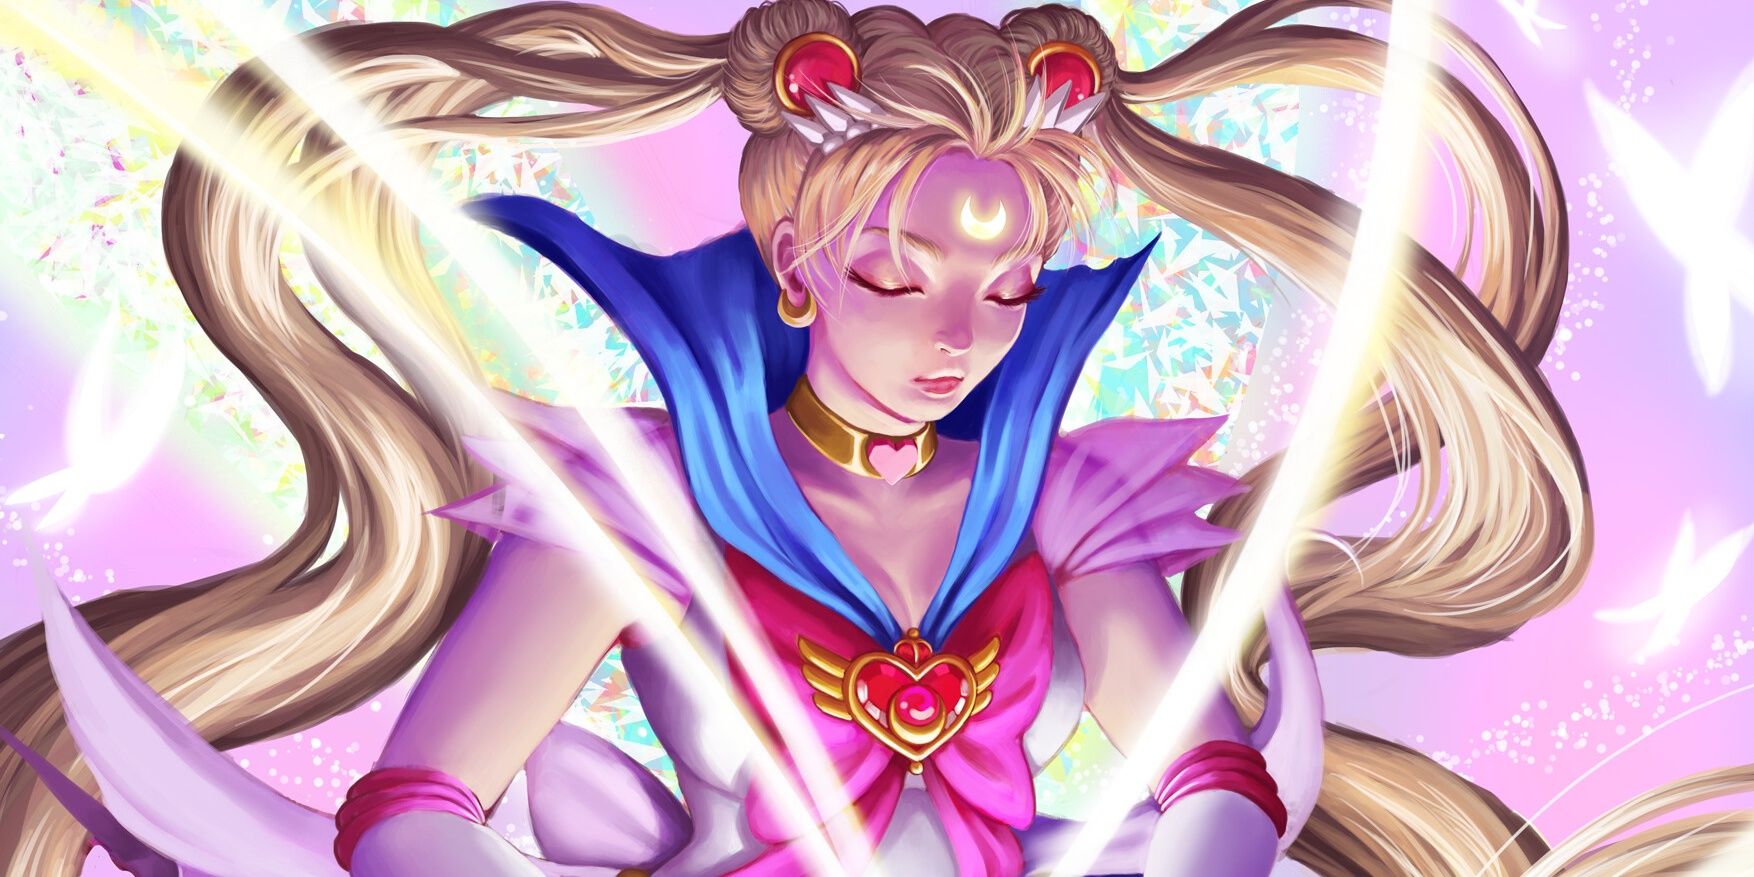 Sailor Moon 10 Sailor Moon Fan Art Pictures You Have To See